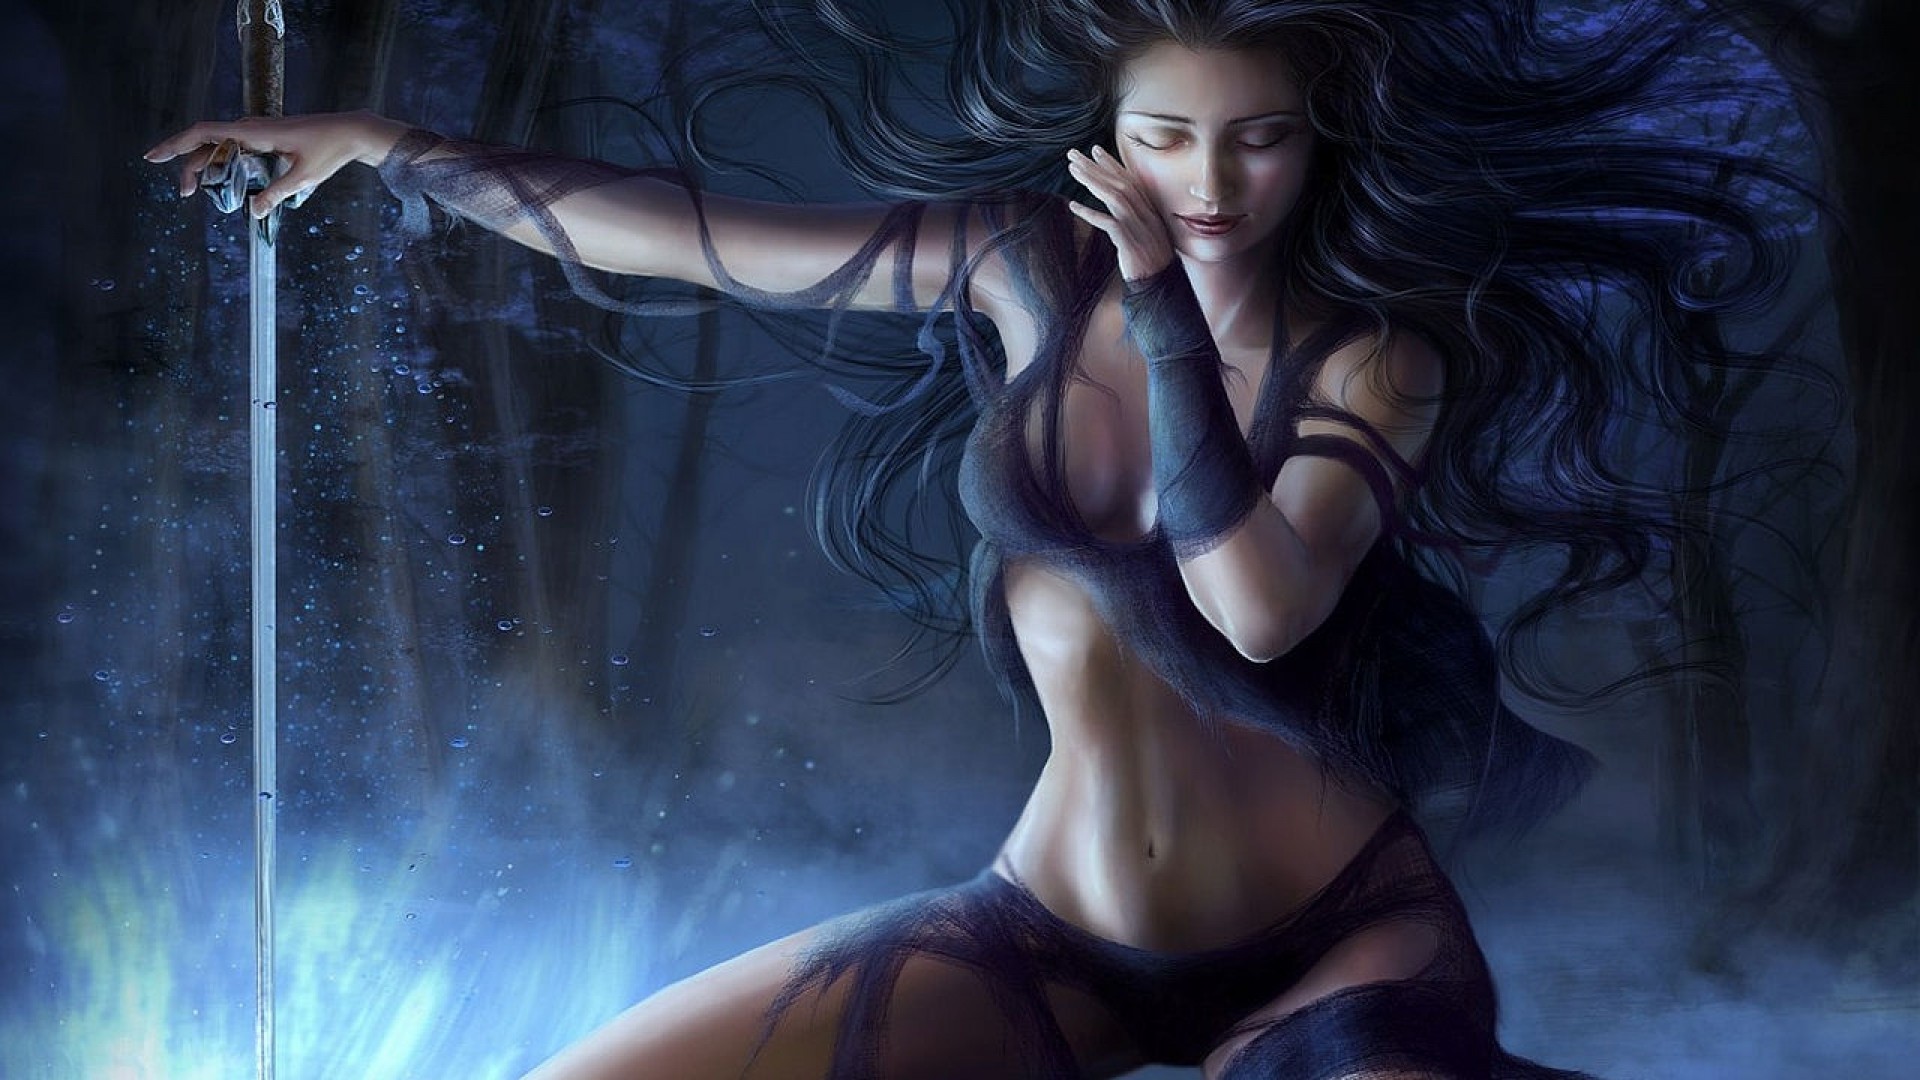 1920x1080 Illustrations Fantasy Art Artwork Warriors Female Warriors ... 46 entries  in Woman Warrior Wallpapers group